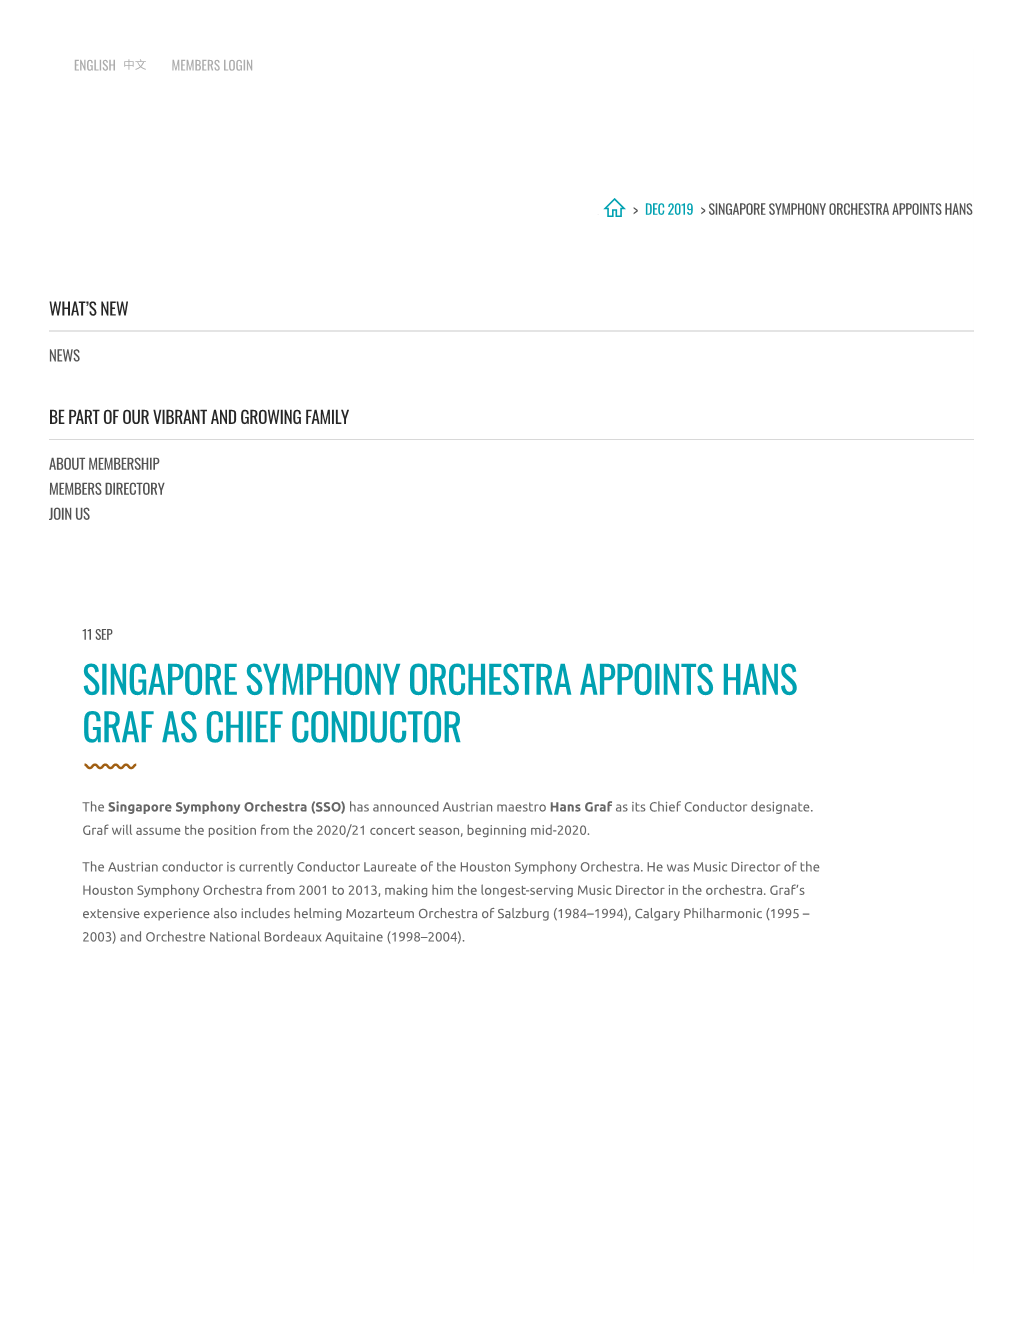 Singapore Symphony Orchestra Appoints Hans Graf As Chief Conductor